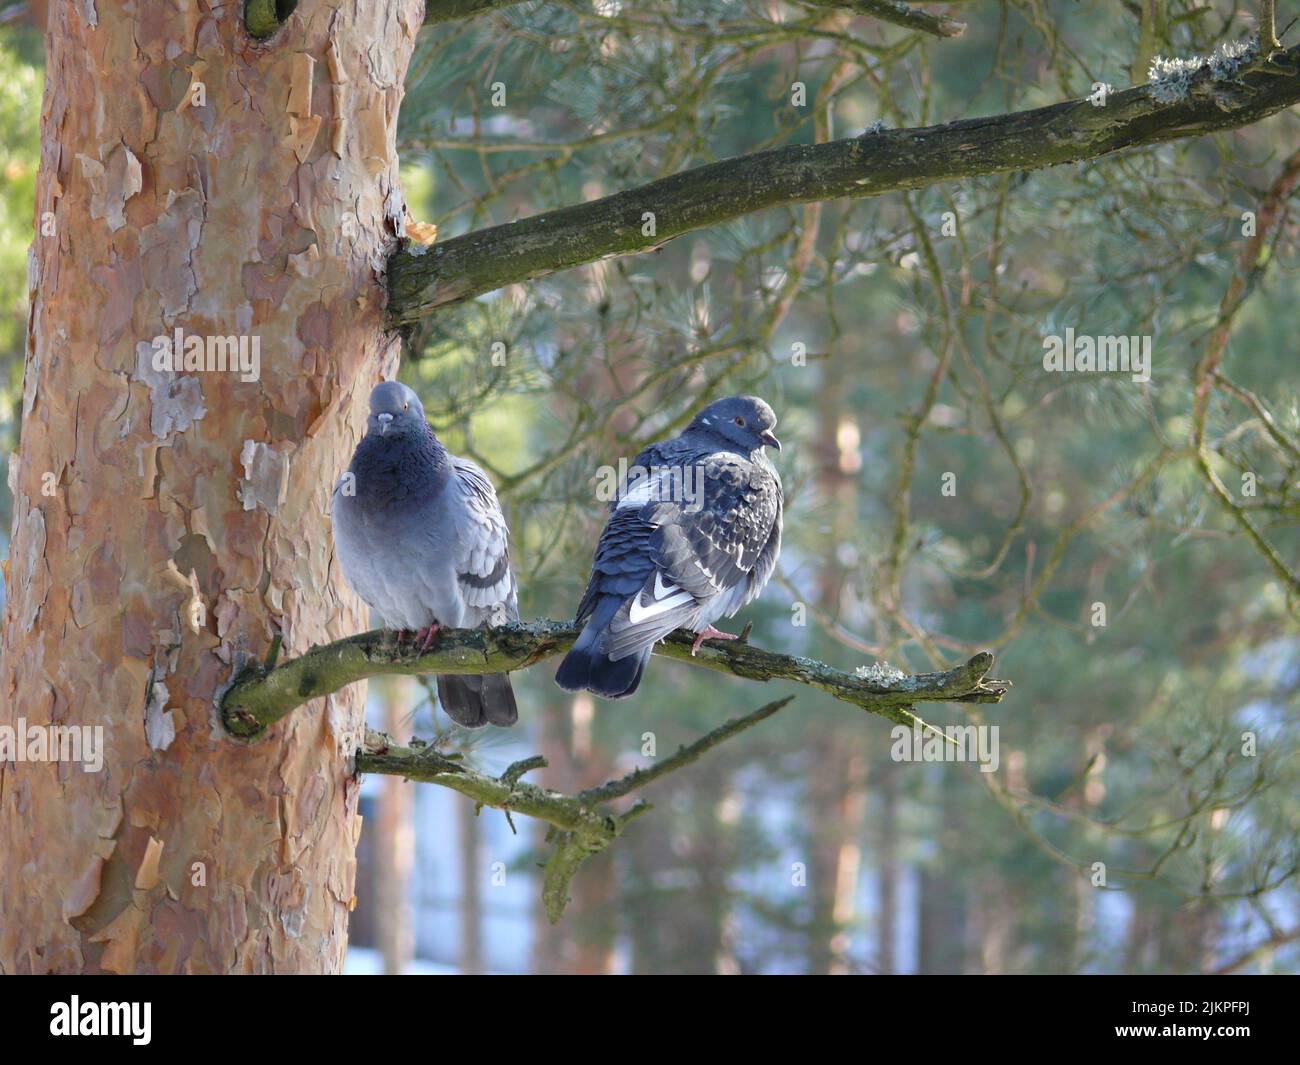 A close-up shot of two pigeons sitting on a tree branch. Stock Photo